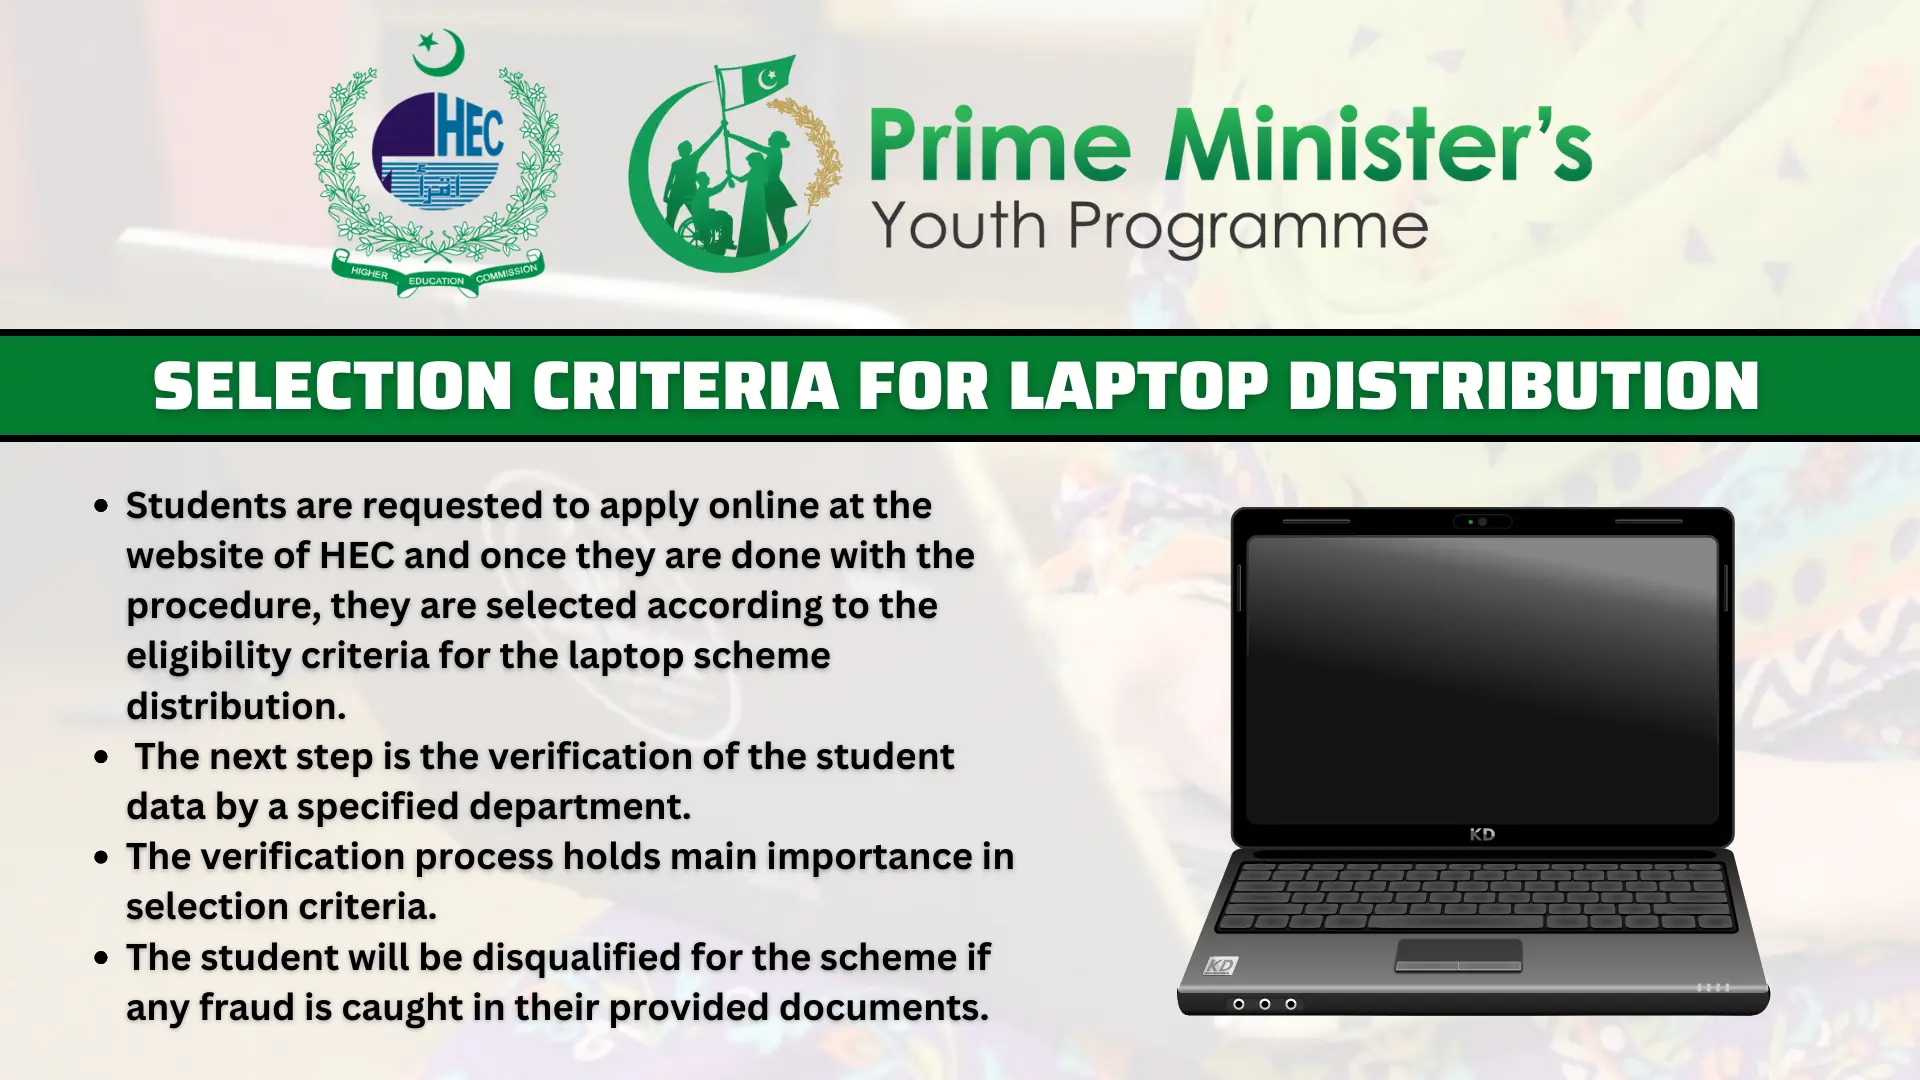 Selection Criteria for Laptop Distribution